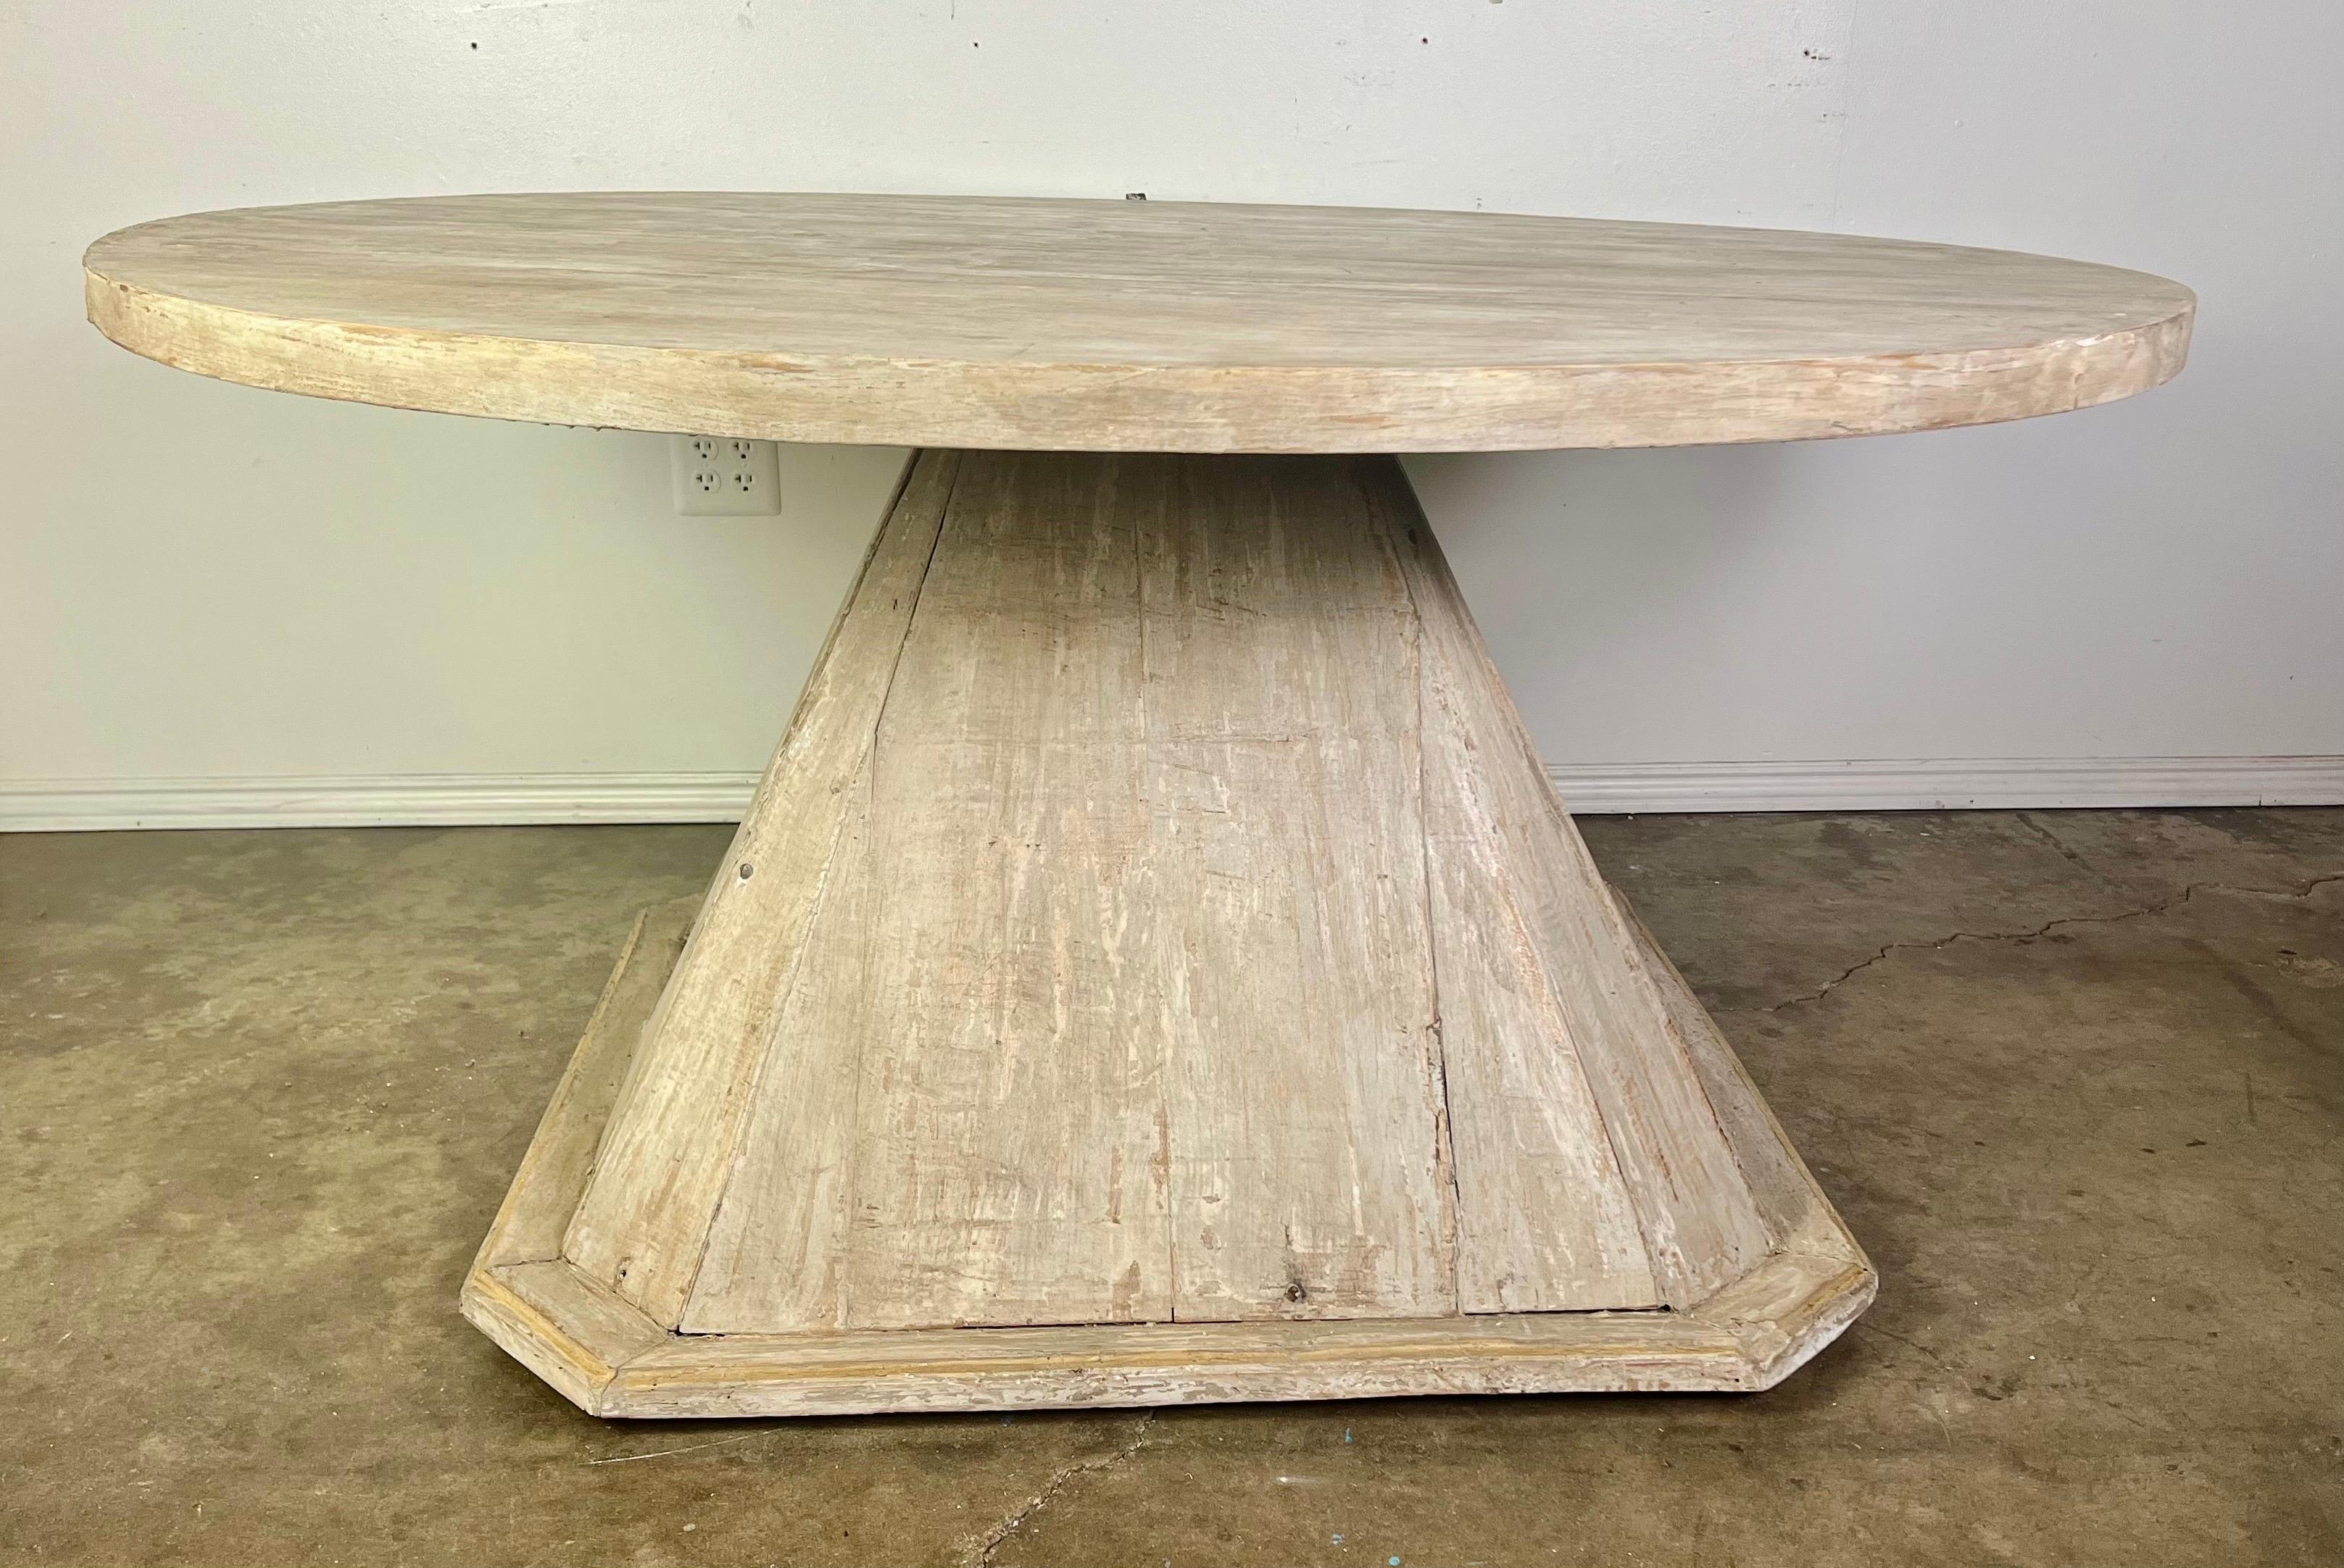 A 19th century Swedish dining table with a pyramid shaped base and a round, beautifully bleached wood top, featuring a light Gustavian style design.  It would undoubtedly bring a touch of Swedish elegance to any dining area.